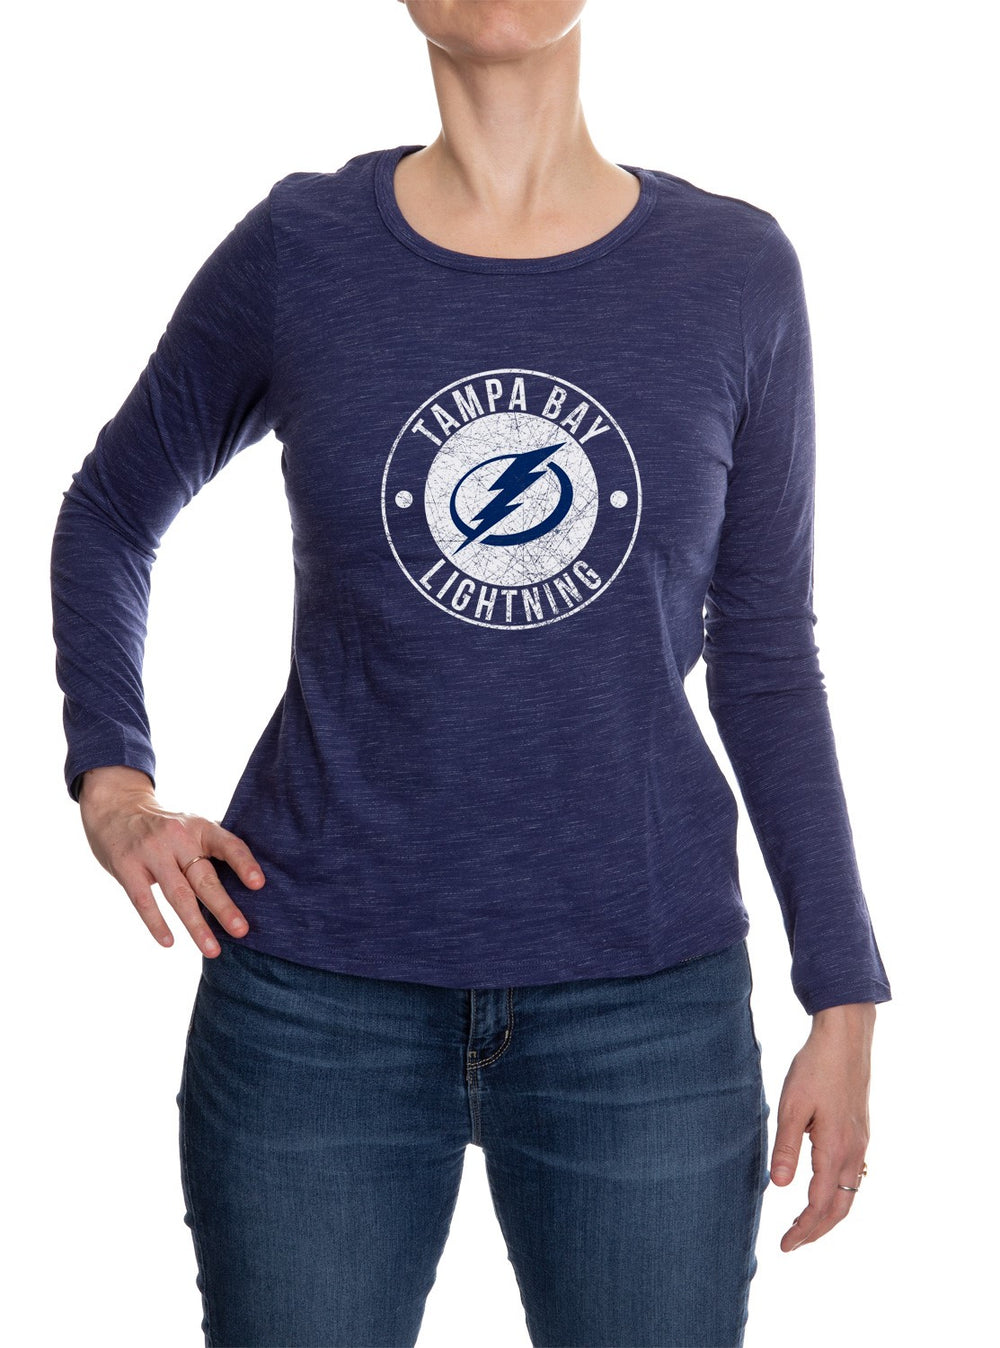 Tampa Bay Lightning Distressed Logo Long Sleeve Shirt for Women in Blue Front View